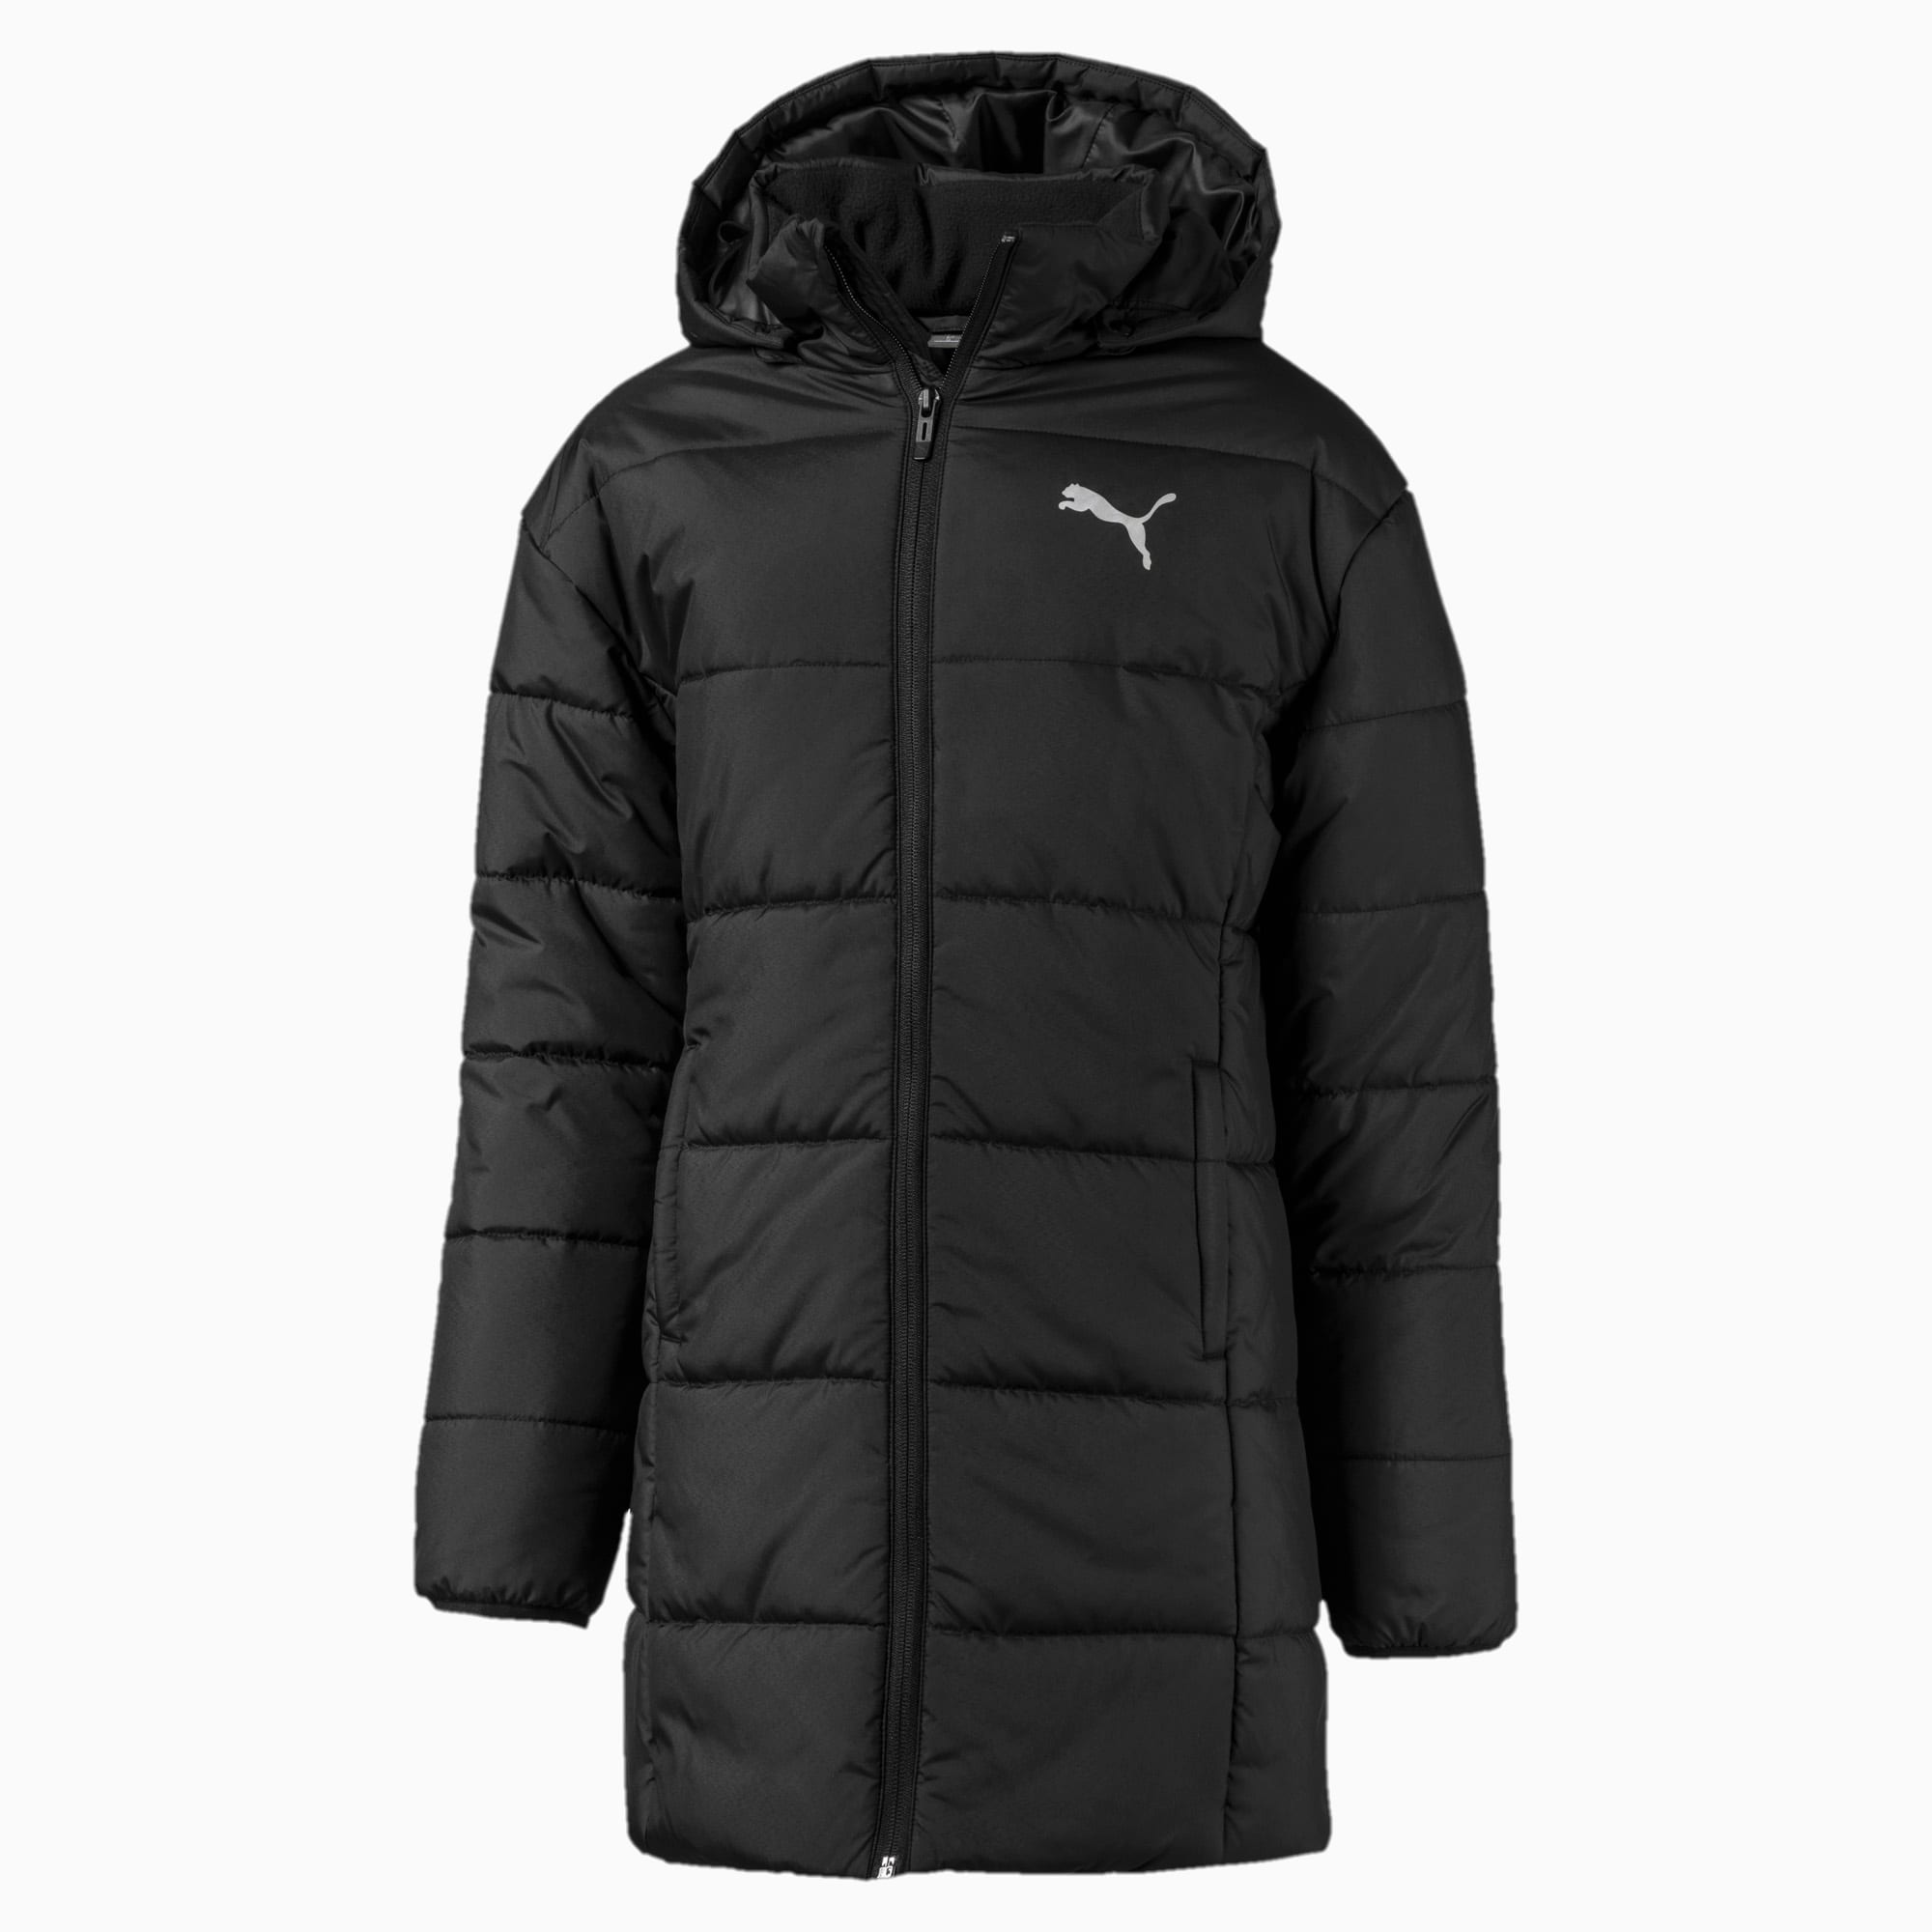 puma black polyester quilted jacket